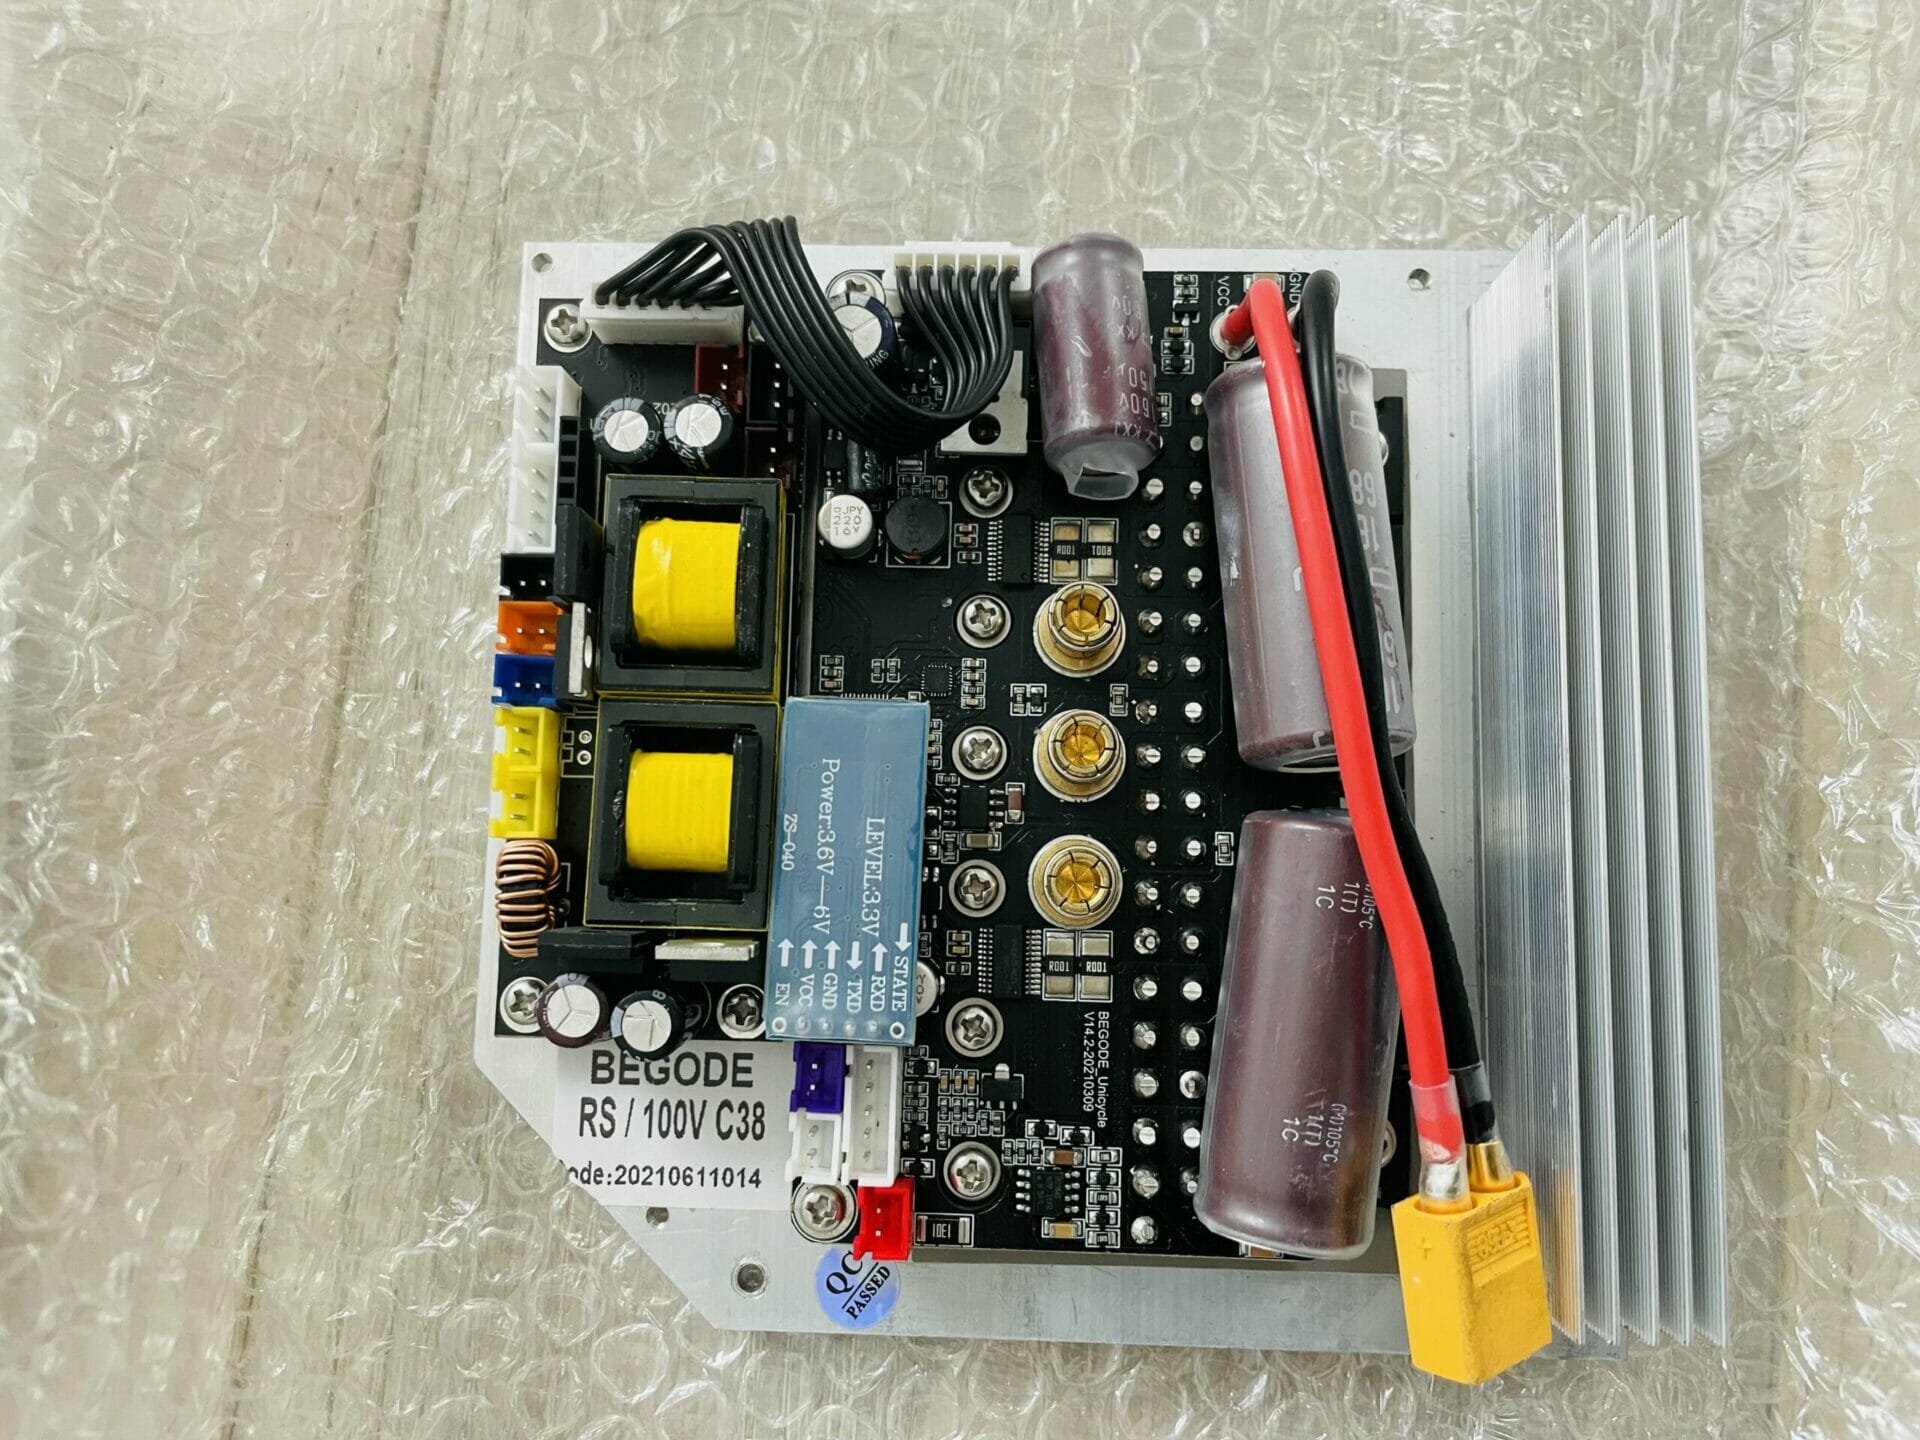 BEGODE RS19 TORQUE BLACK MAINBOARD with capability for high current tolerance